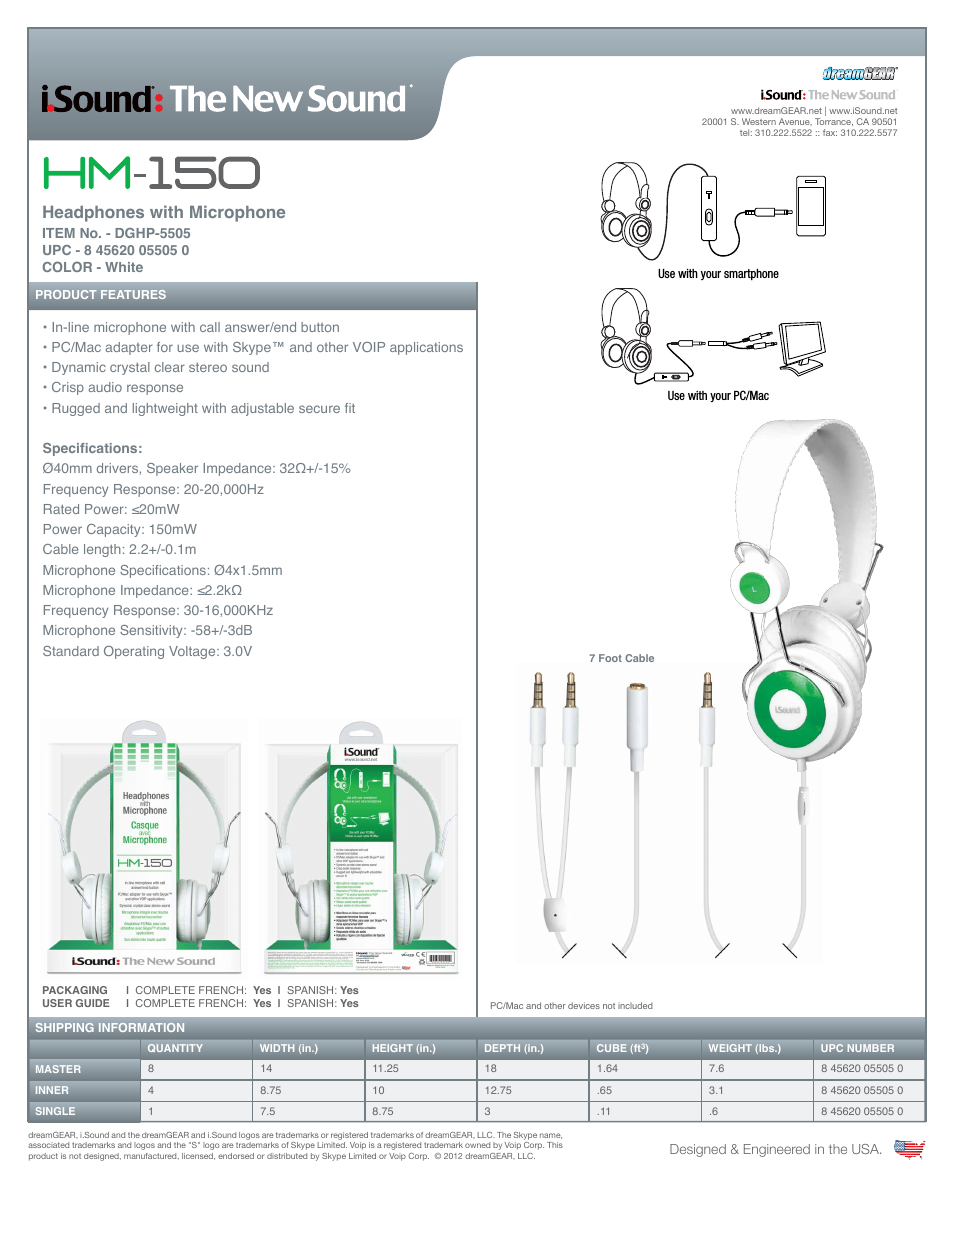 HM-150 Headphones with Microphone - Sell Sheet